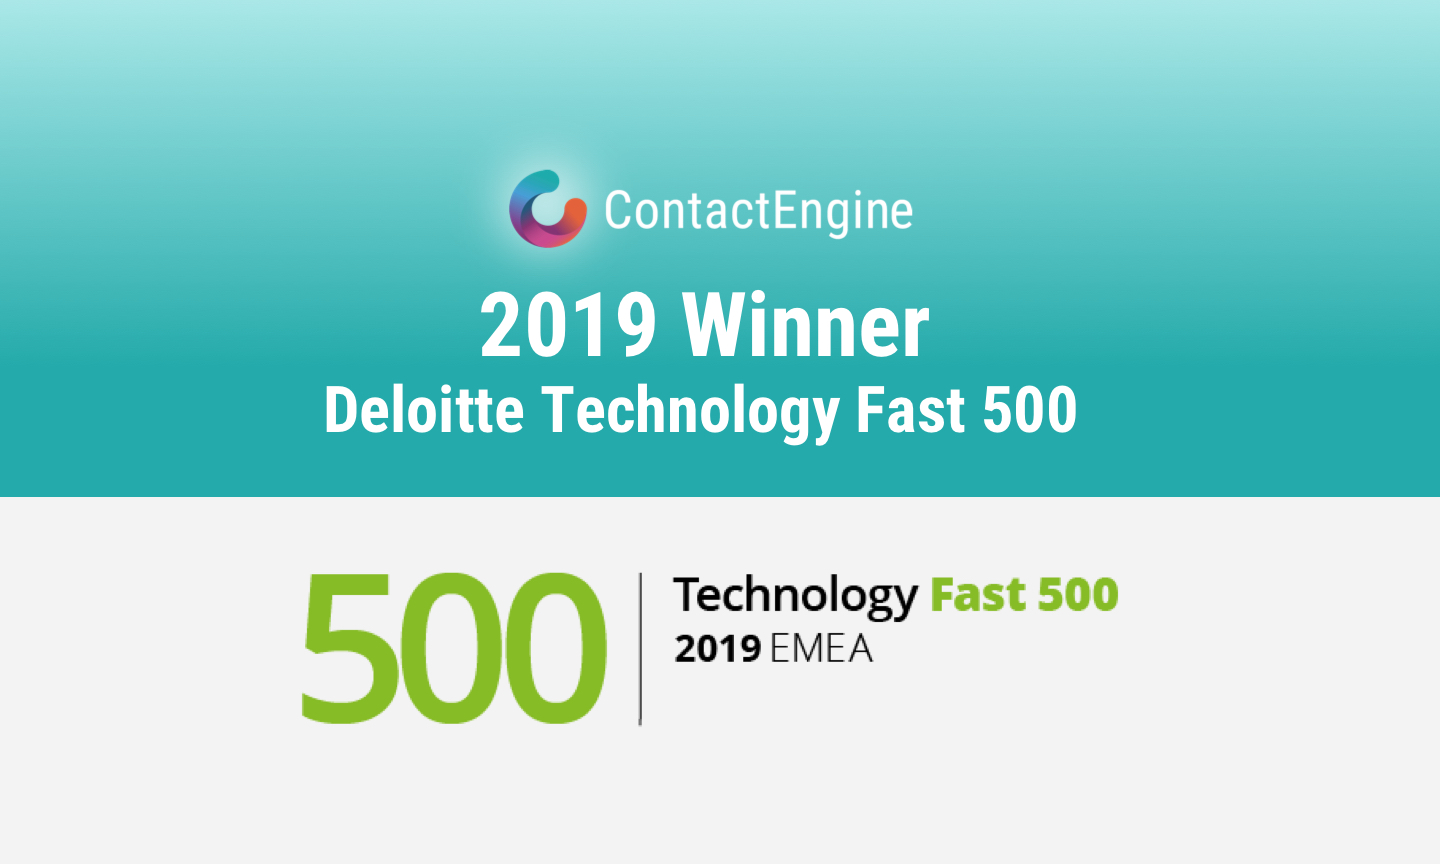 ContactEngine named one of the fastestgrowing companies by Deloitte